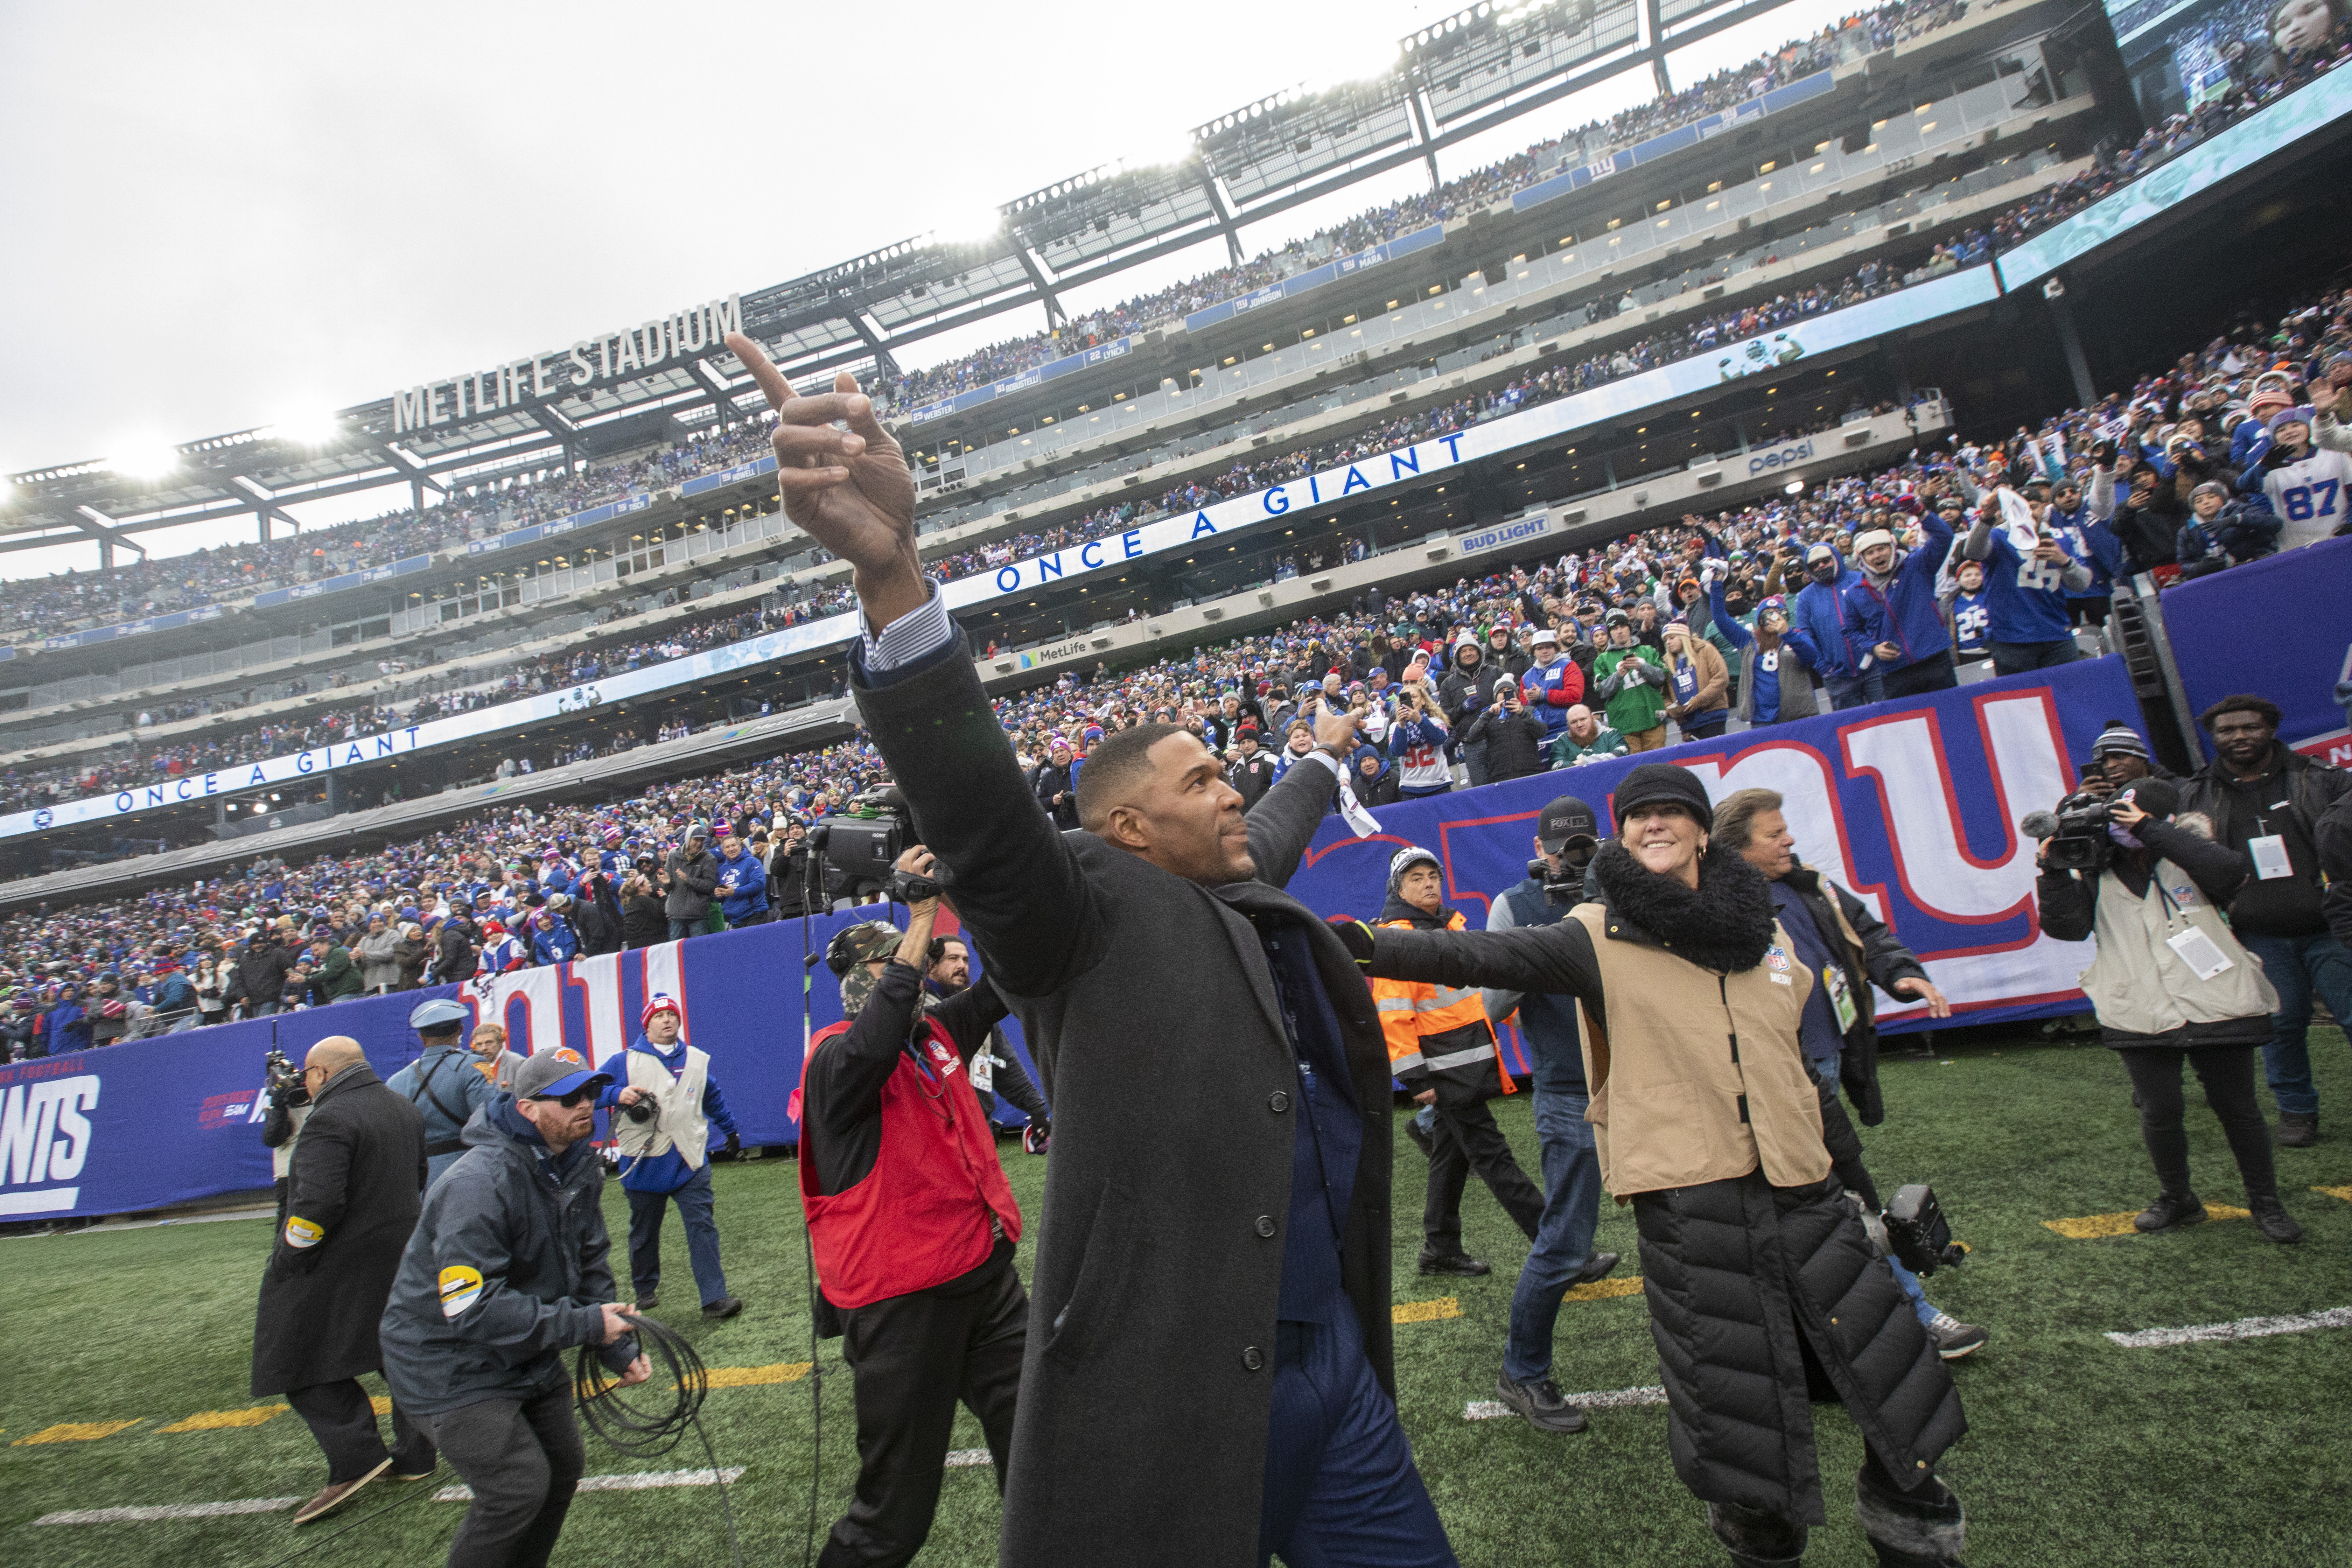 Former New York Giants great Michael Strahan waves to the crowd during a halftime ceremony to retire Strahan’s No. 92 jersey on Sunday, Nov. 28, 2021 at MetLife Stadium.